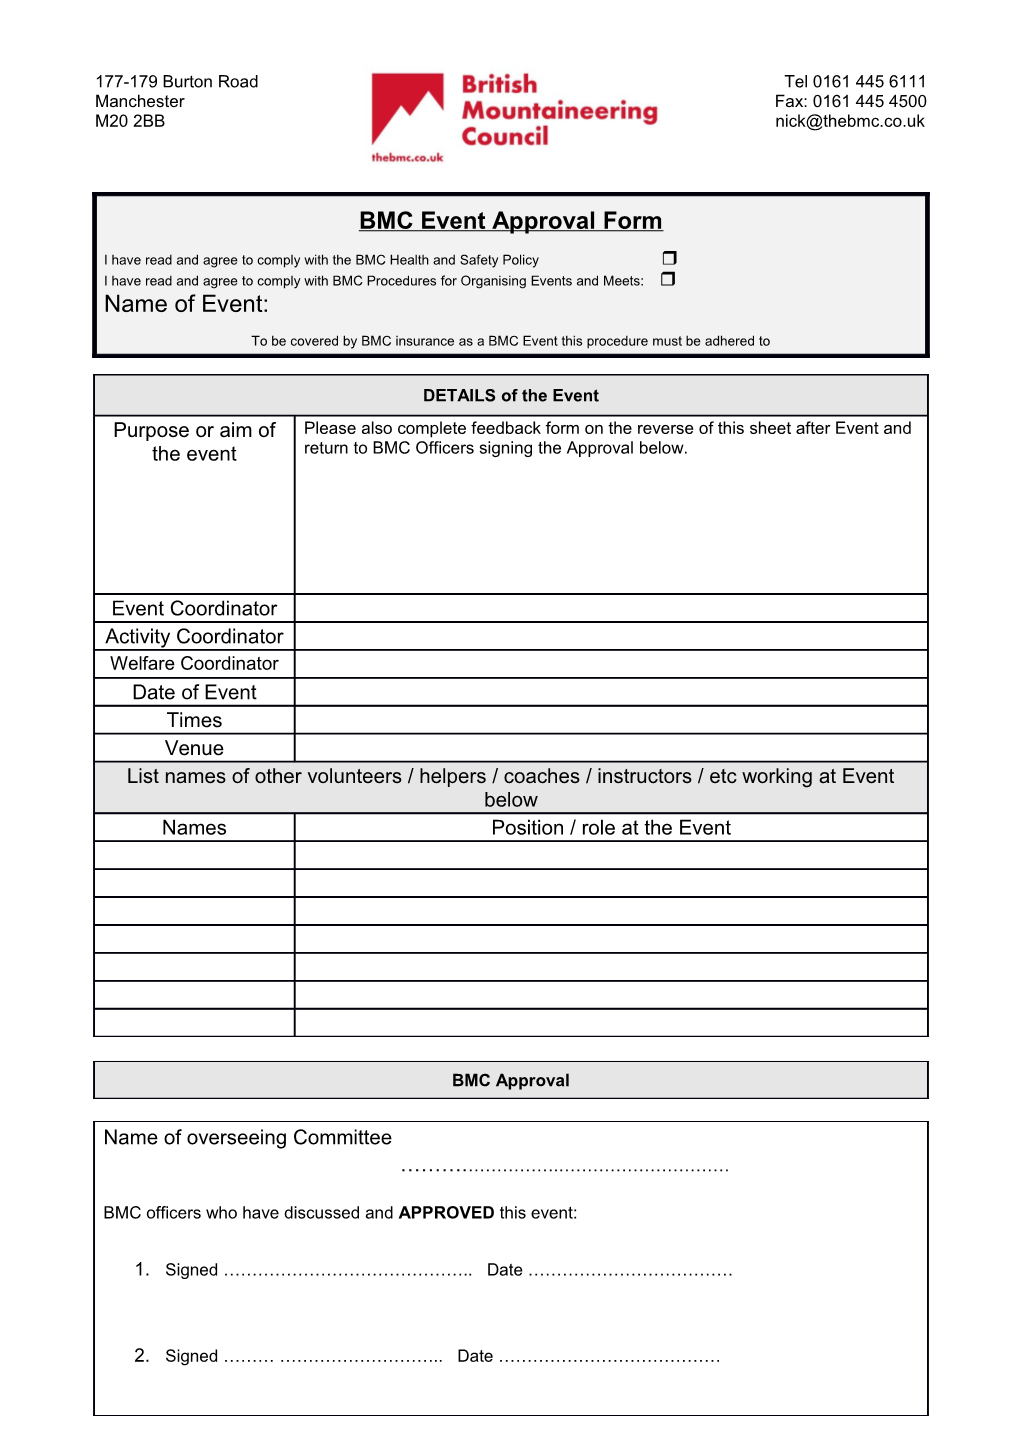 BMC Event Approval Form